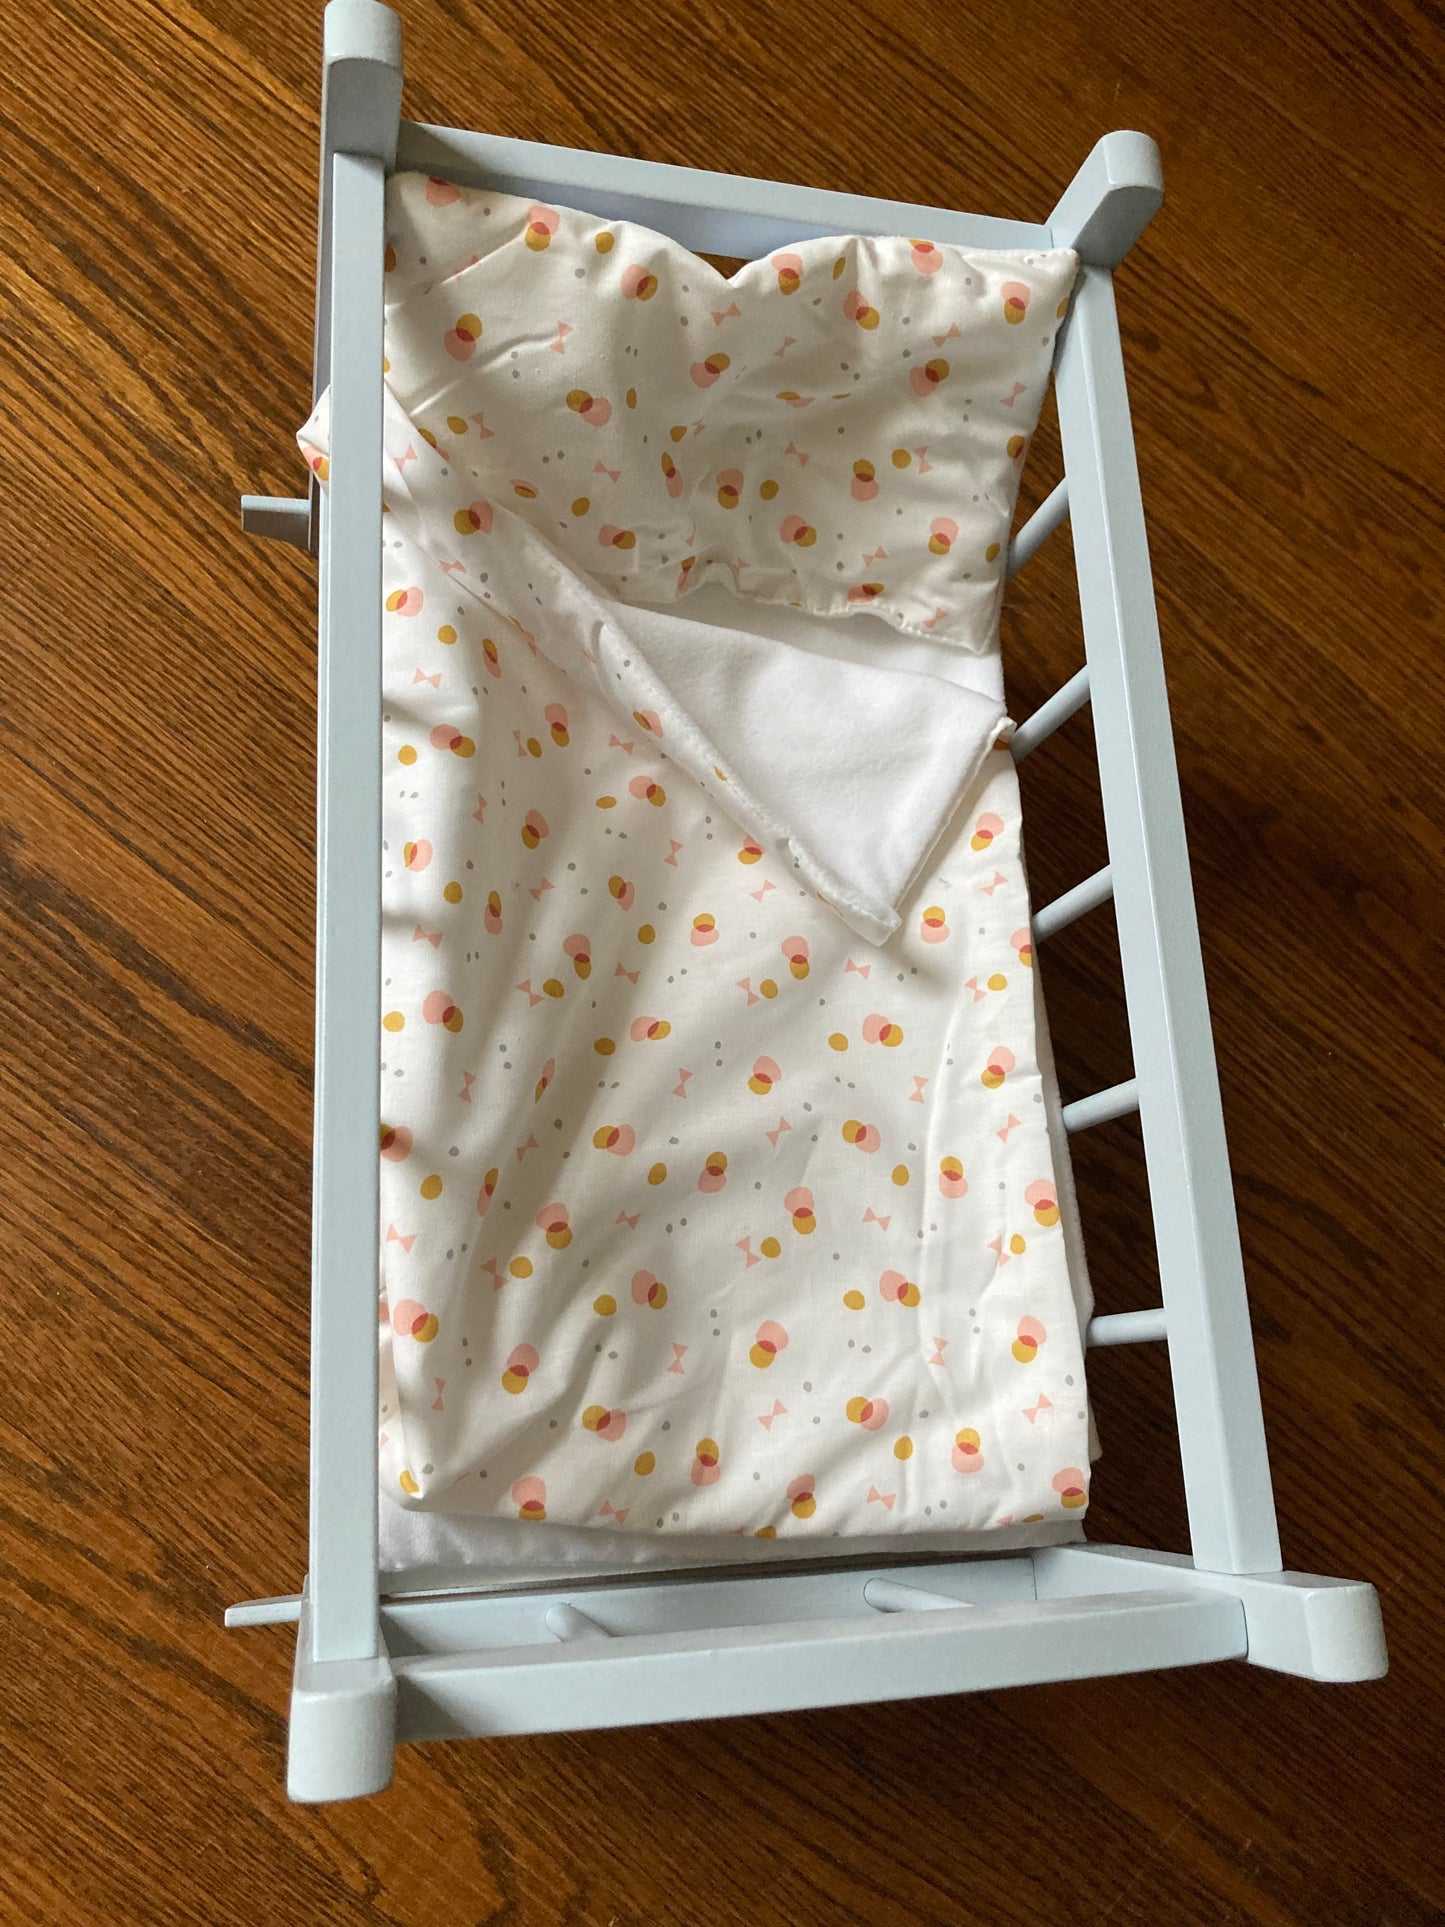 Dolls, Beds and Carriers - Wooden CRADLE, with Cotton Bedding!